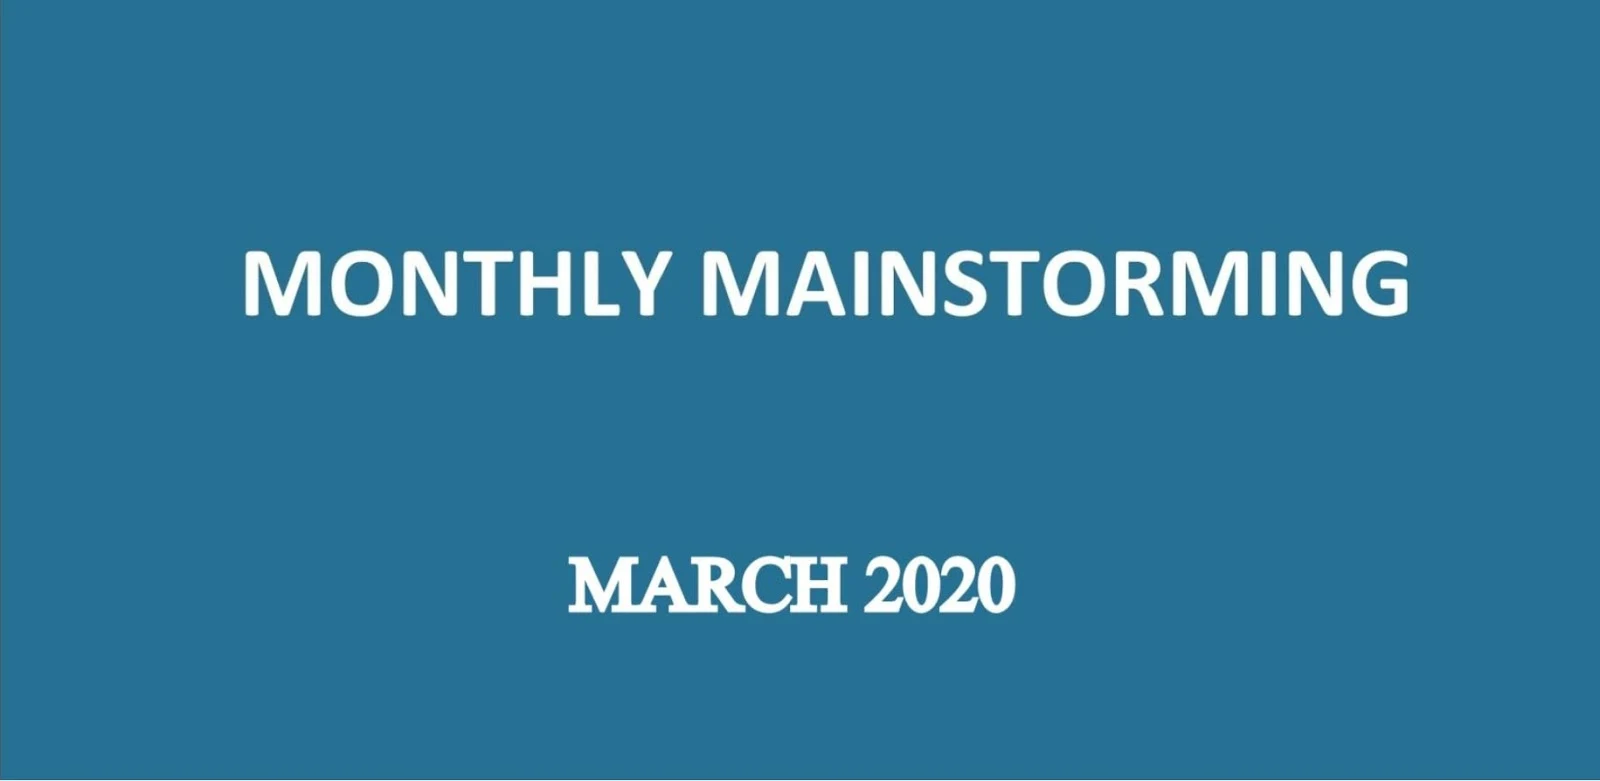 UPSC Mainstorming March 2020